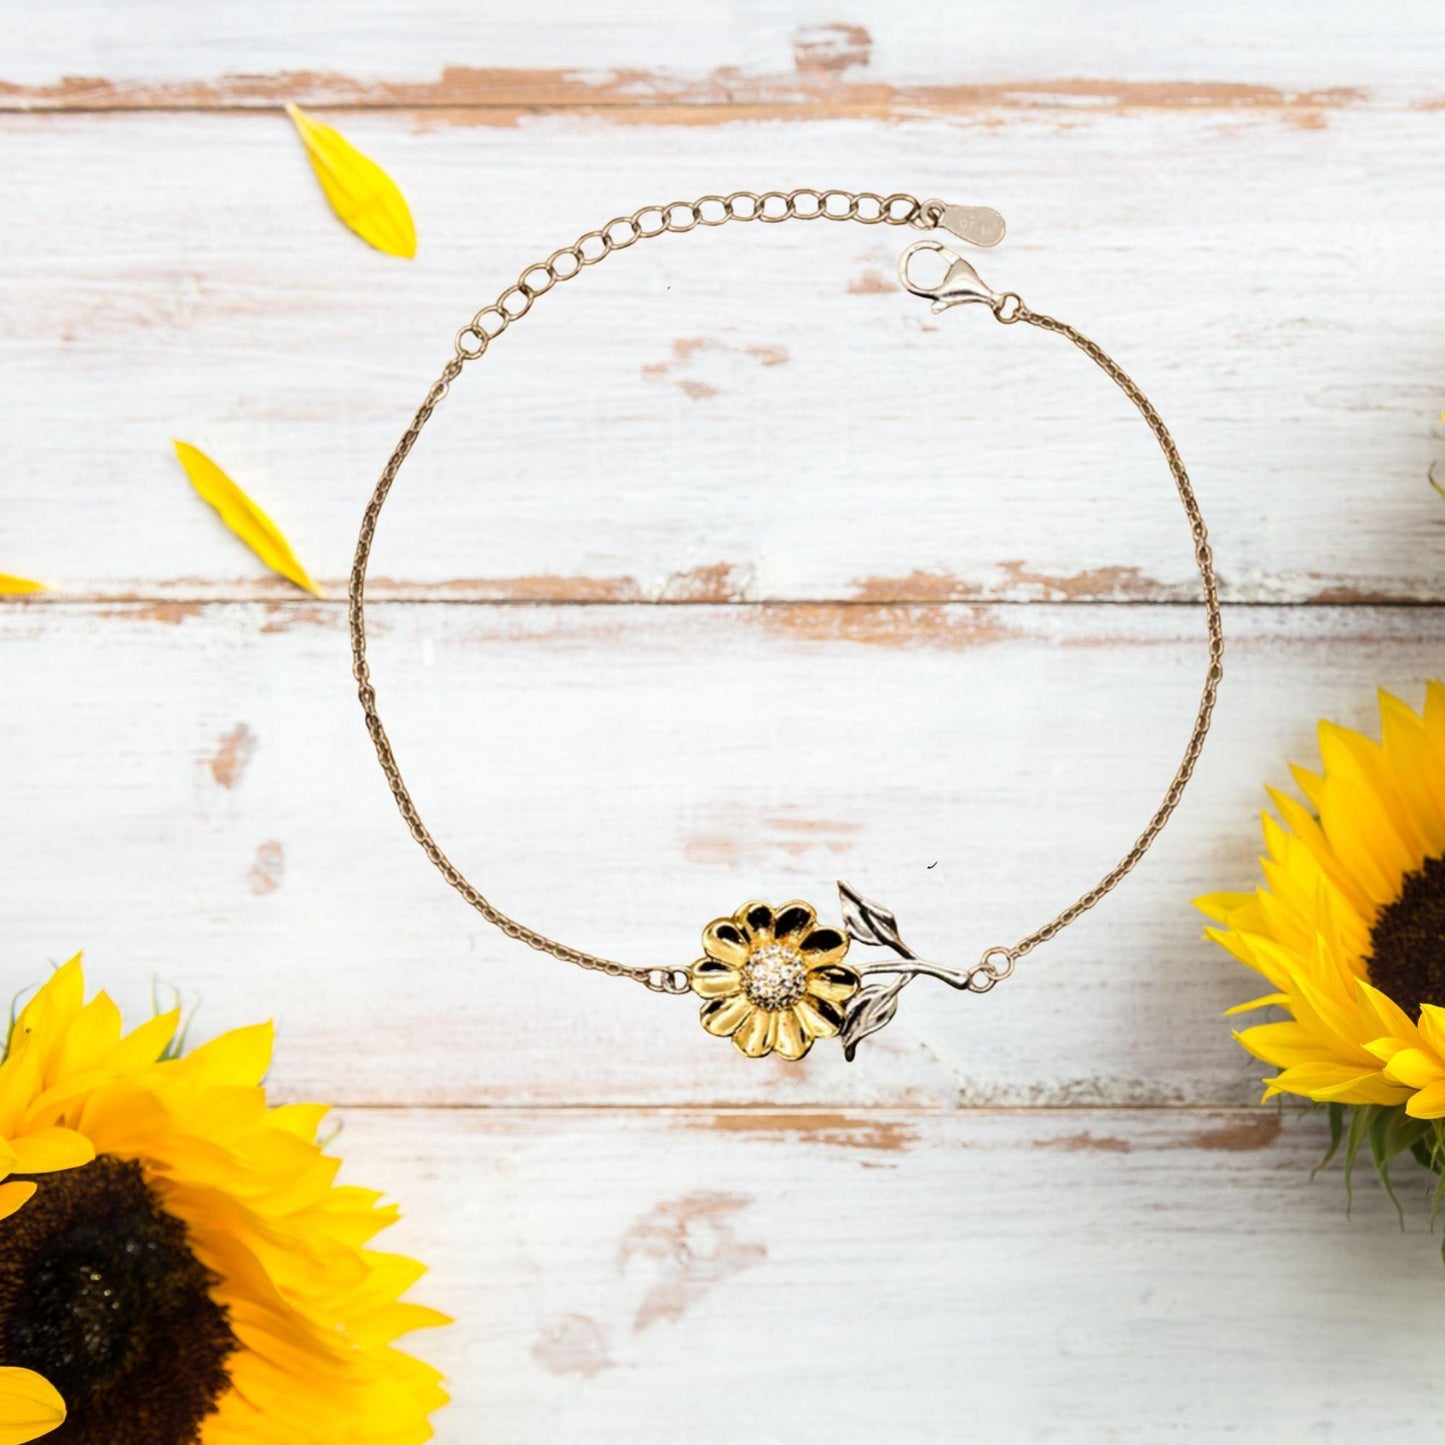 Motivational Husband Sunflower Bracelet - I can promise to love you for the rest of my life, Birthday, Christmas Holiday Jewelry Gift - Mallard Moon Gift Shop